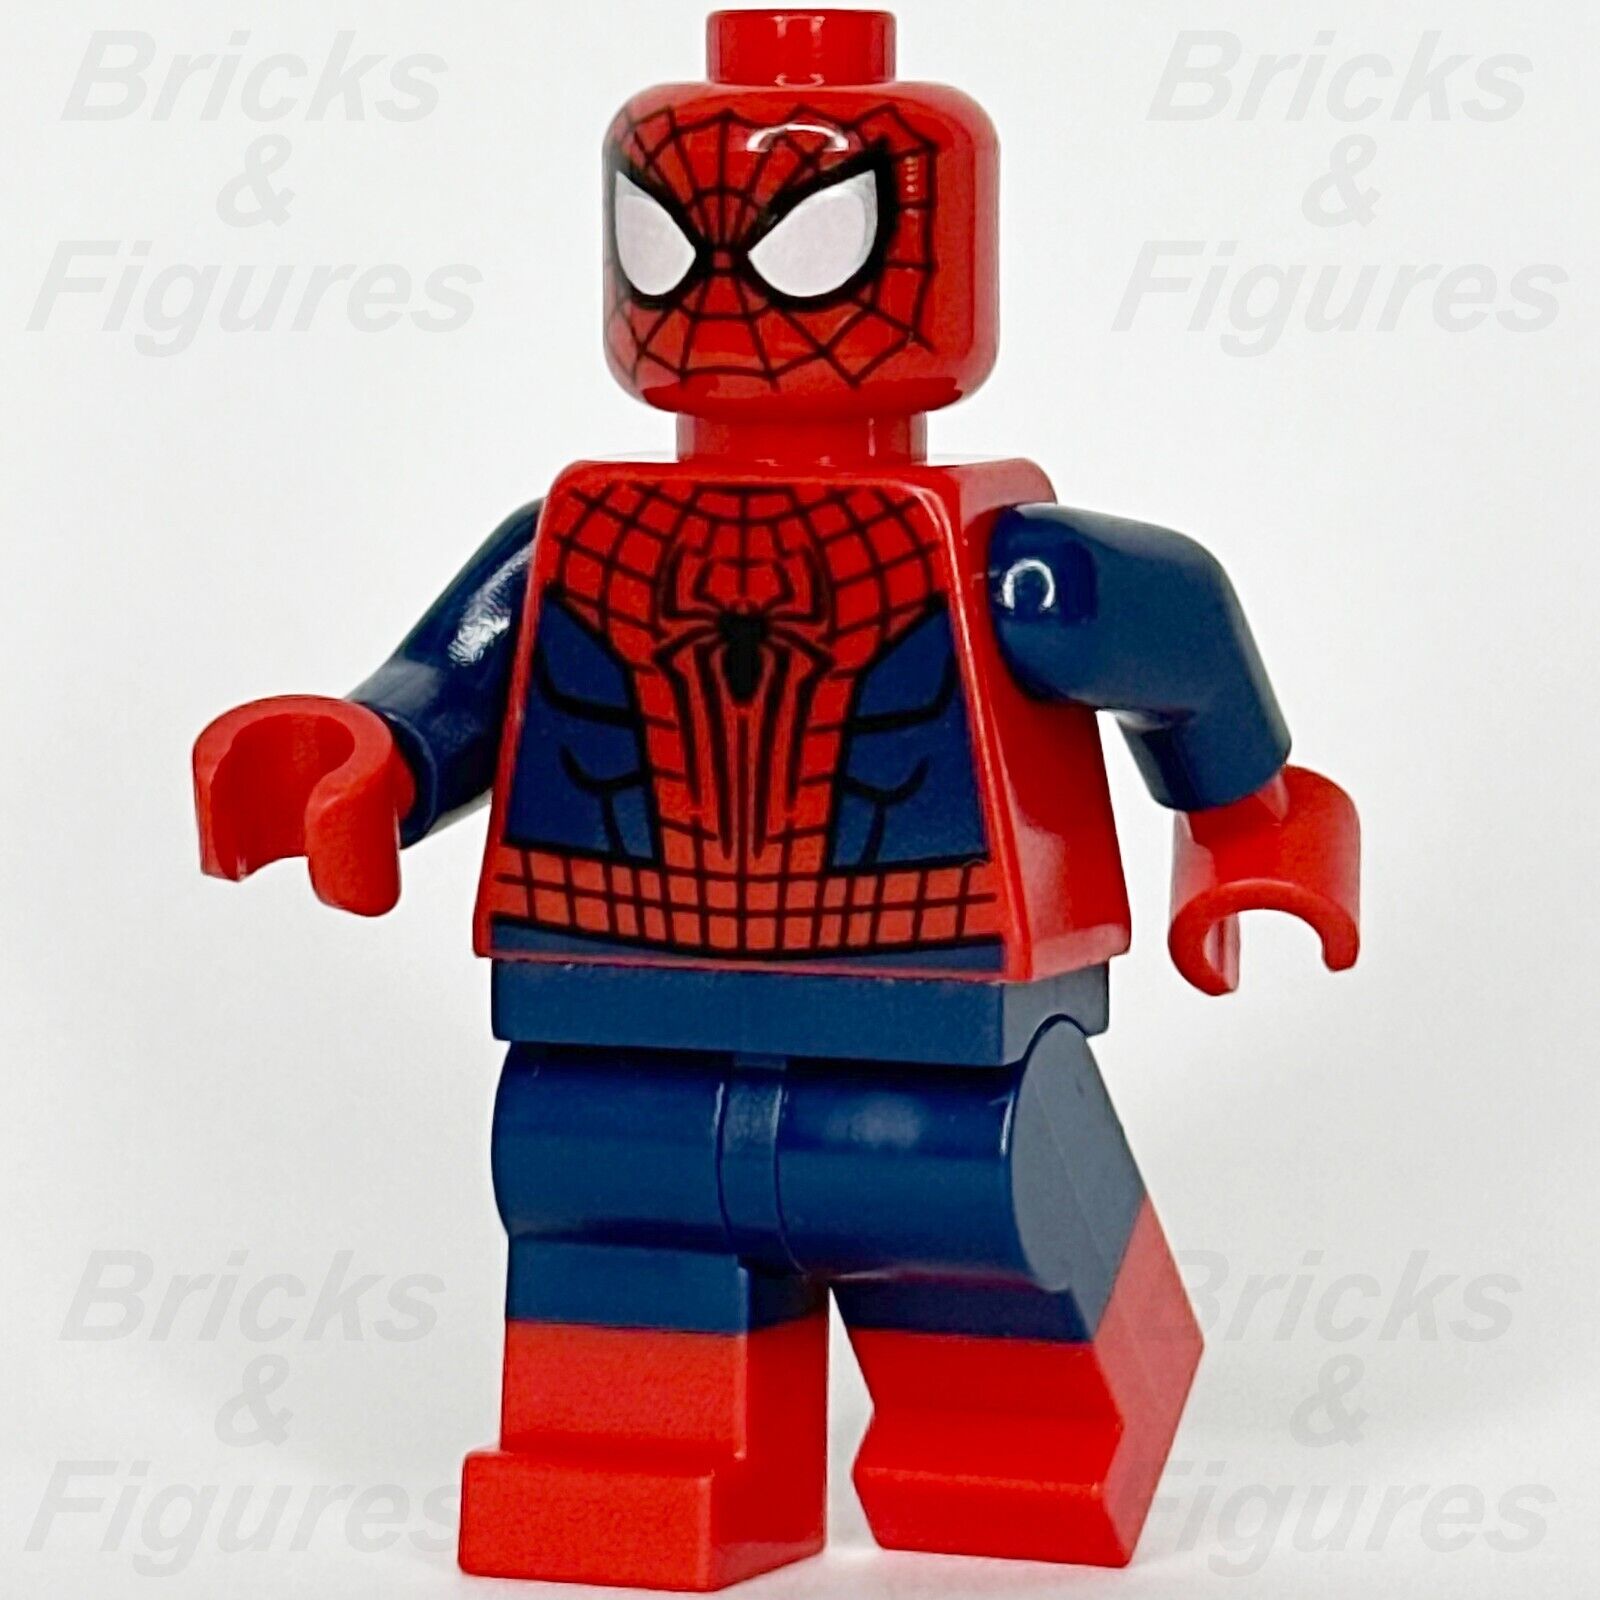 LEGO Super Heroes The Amazing Spider-Man Minifigure Peter Parker 76261 sh889